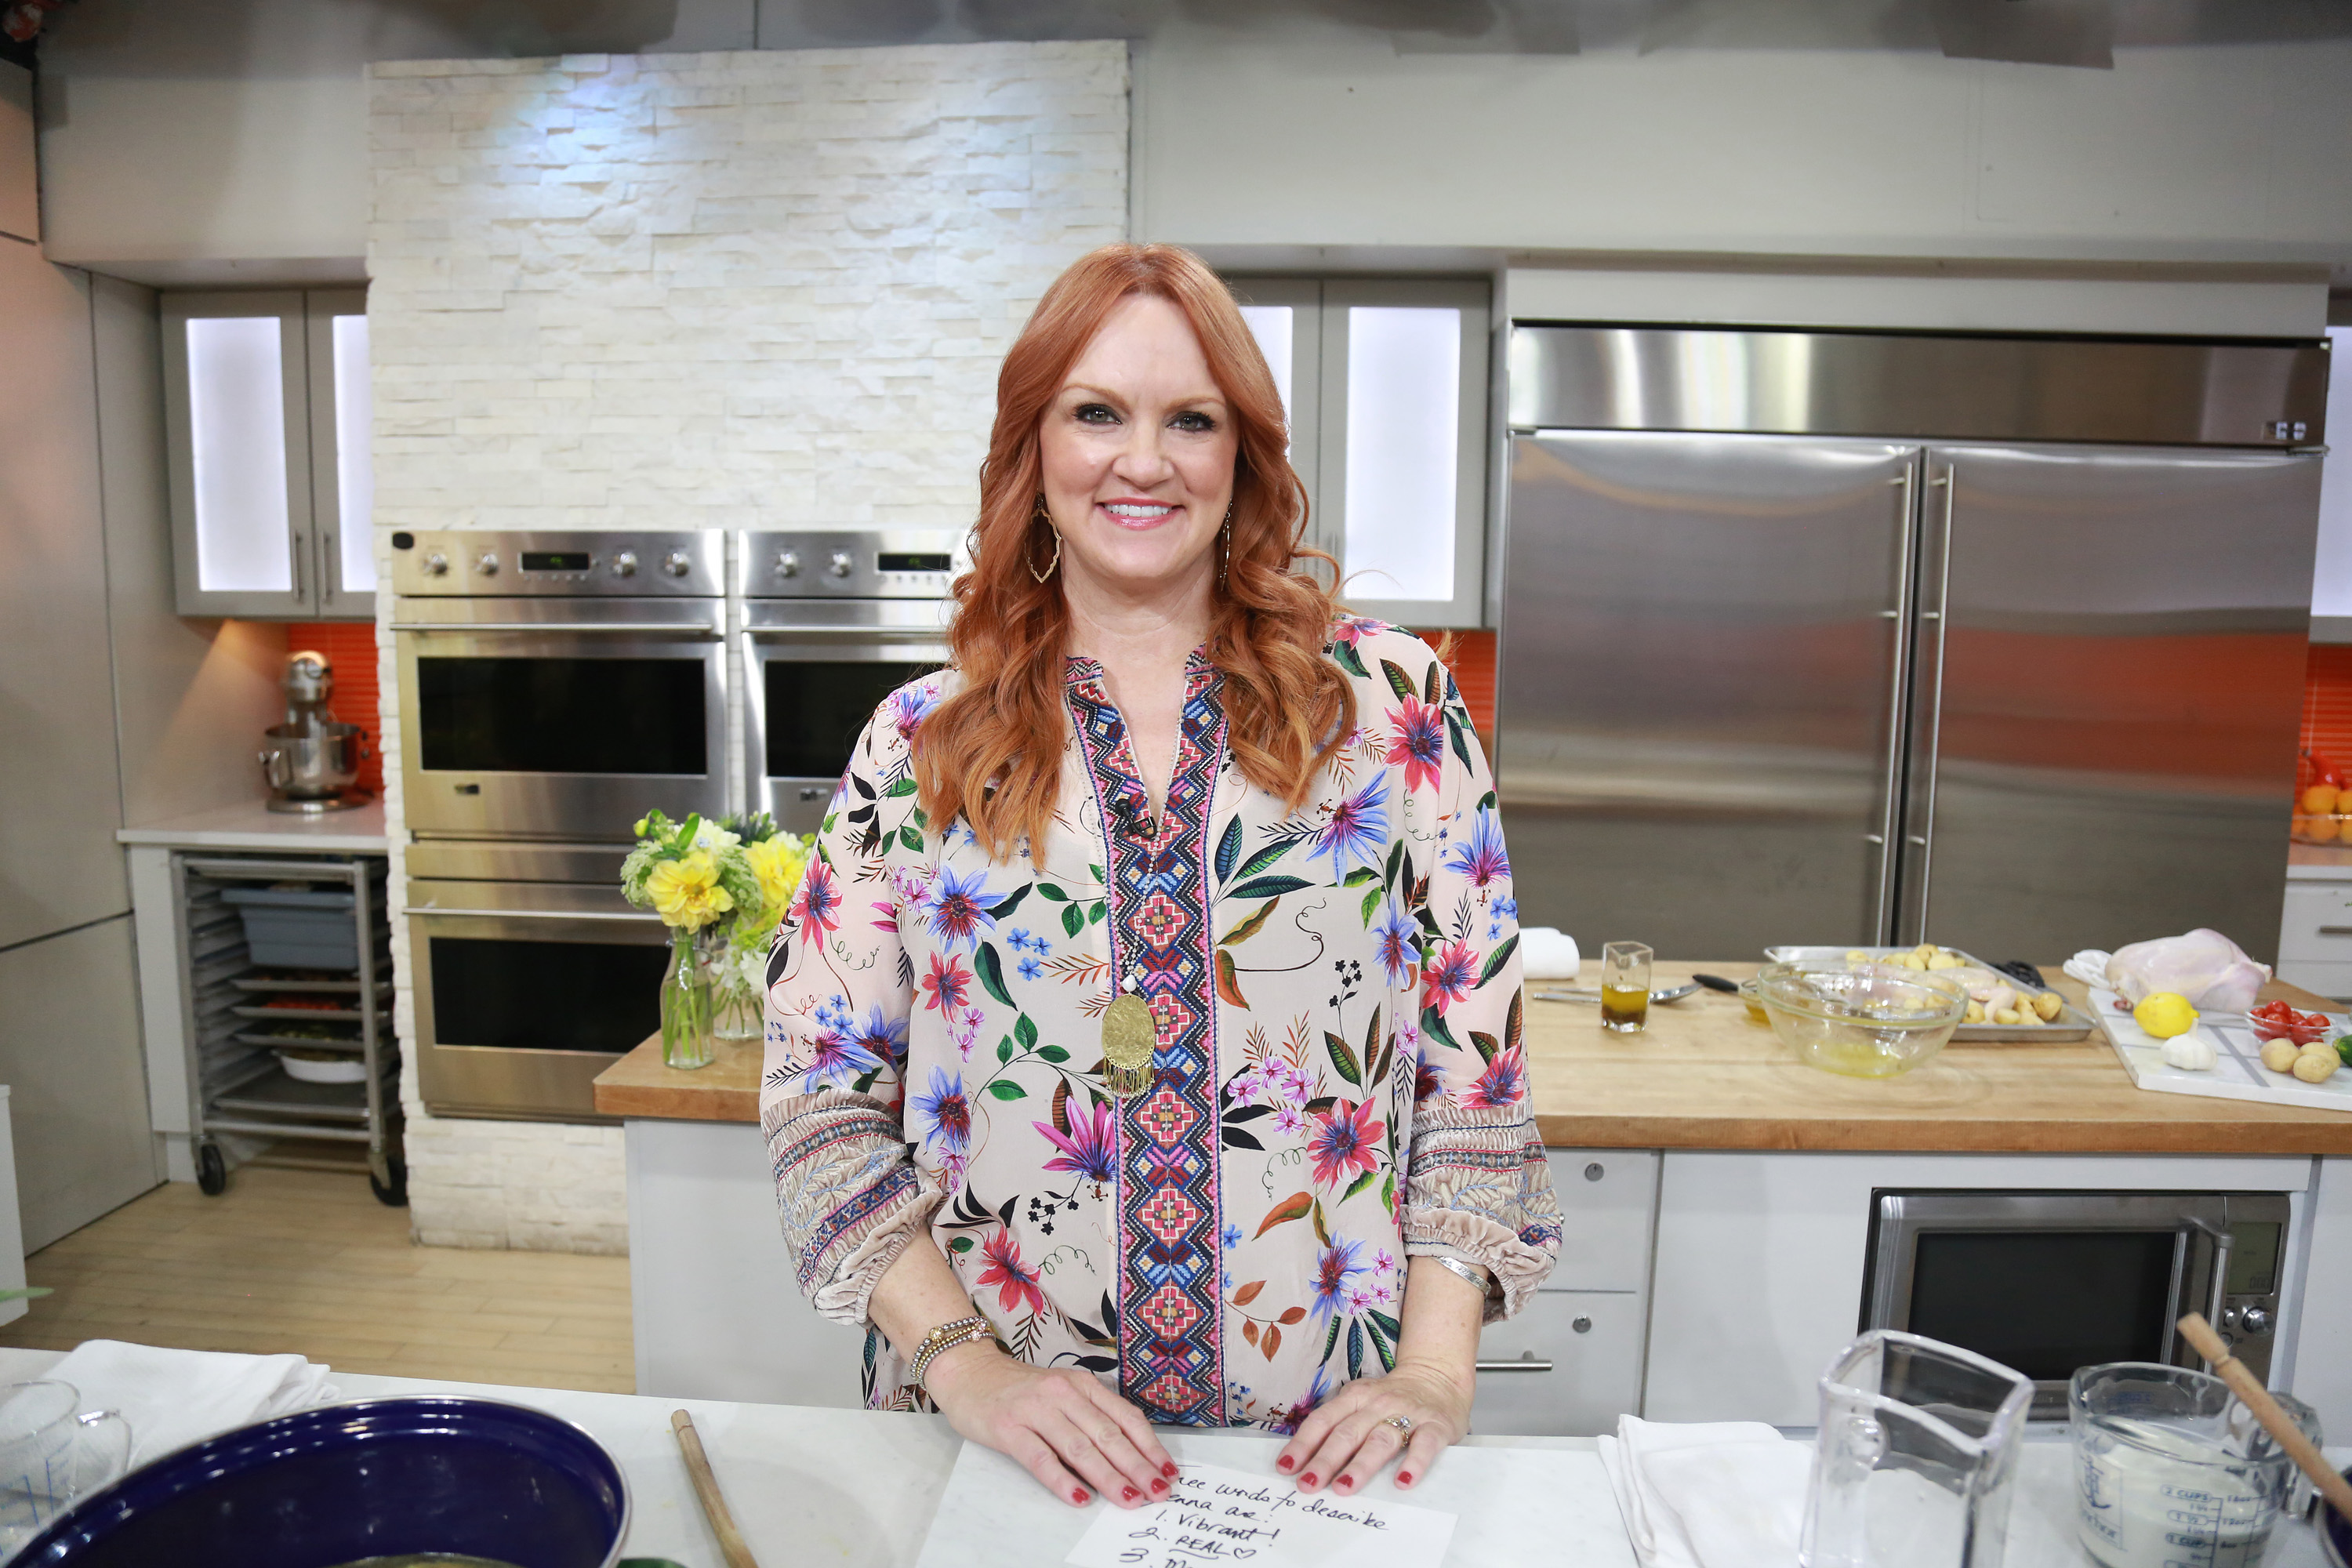 The Pioneer Woman Ree Drummond poses in the Today show kitchen.